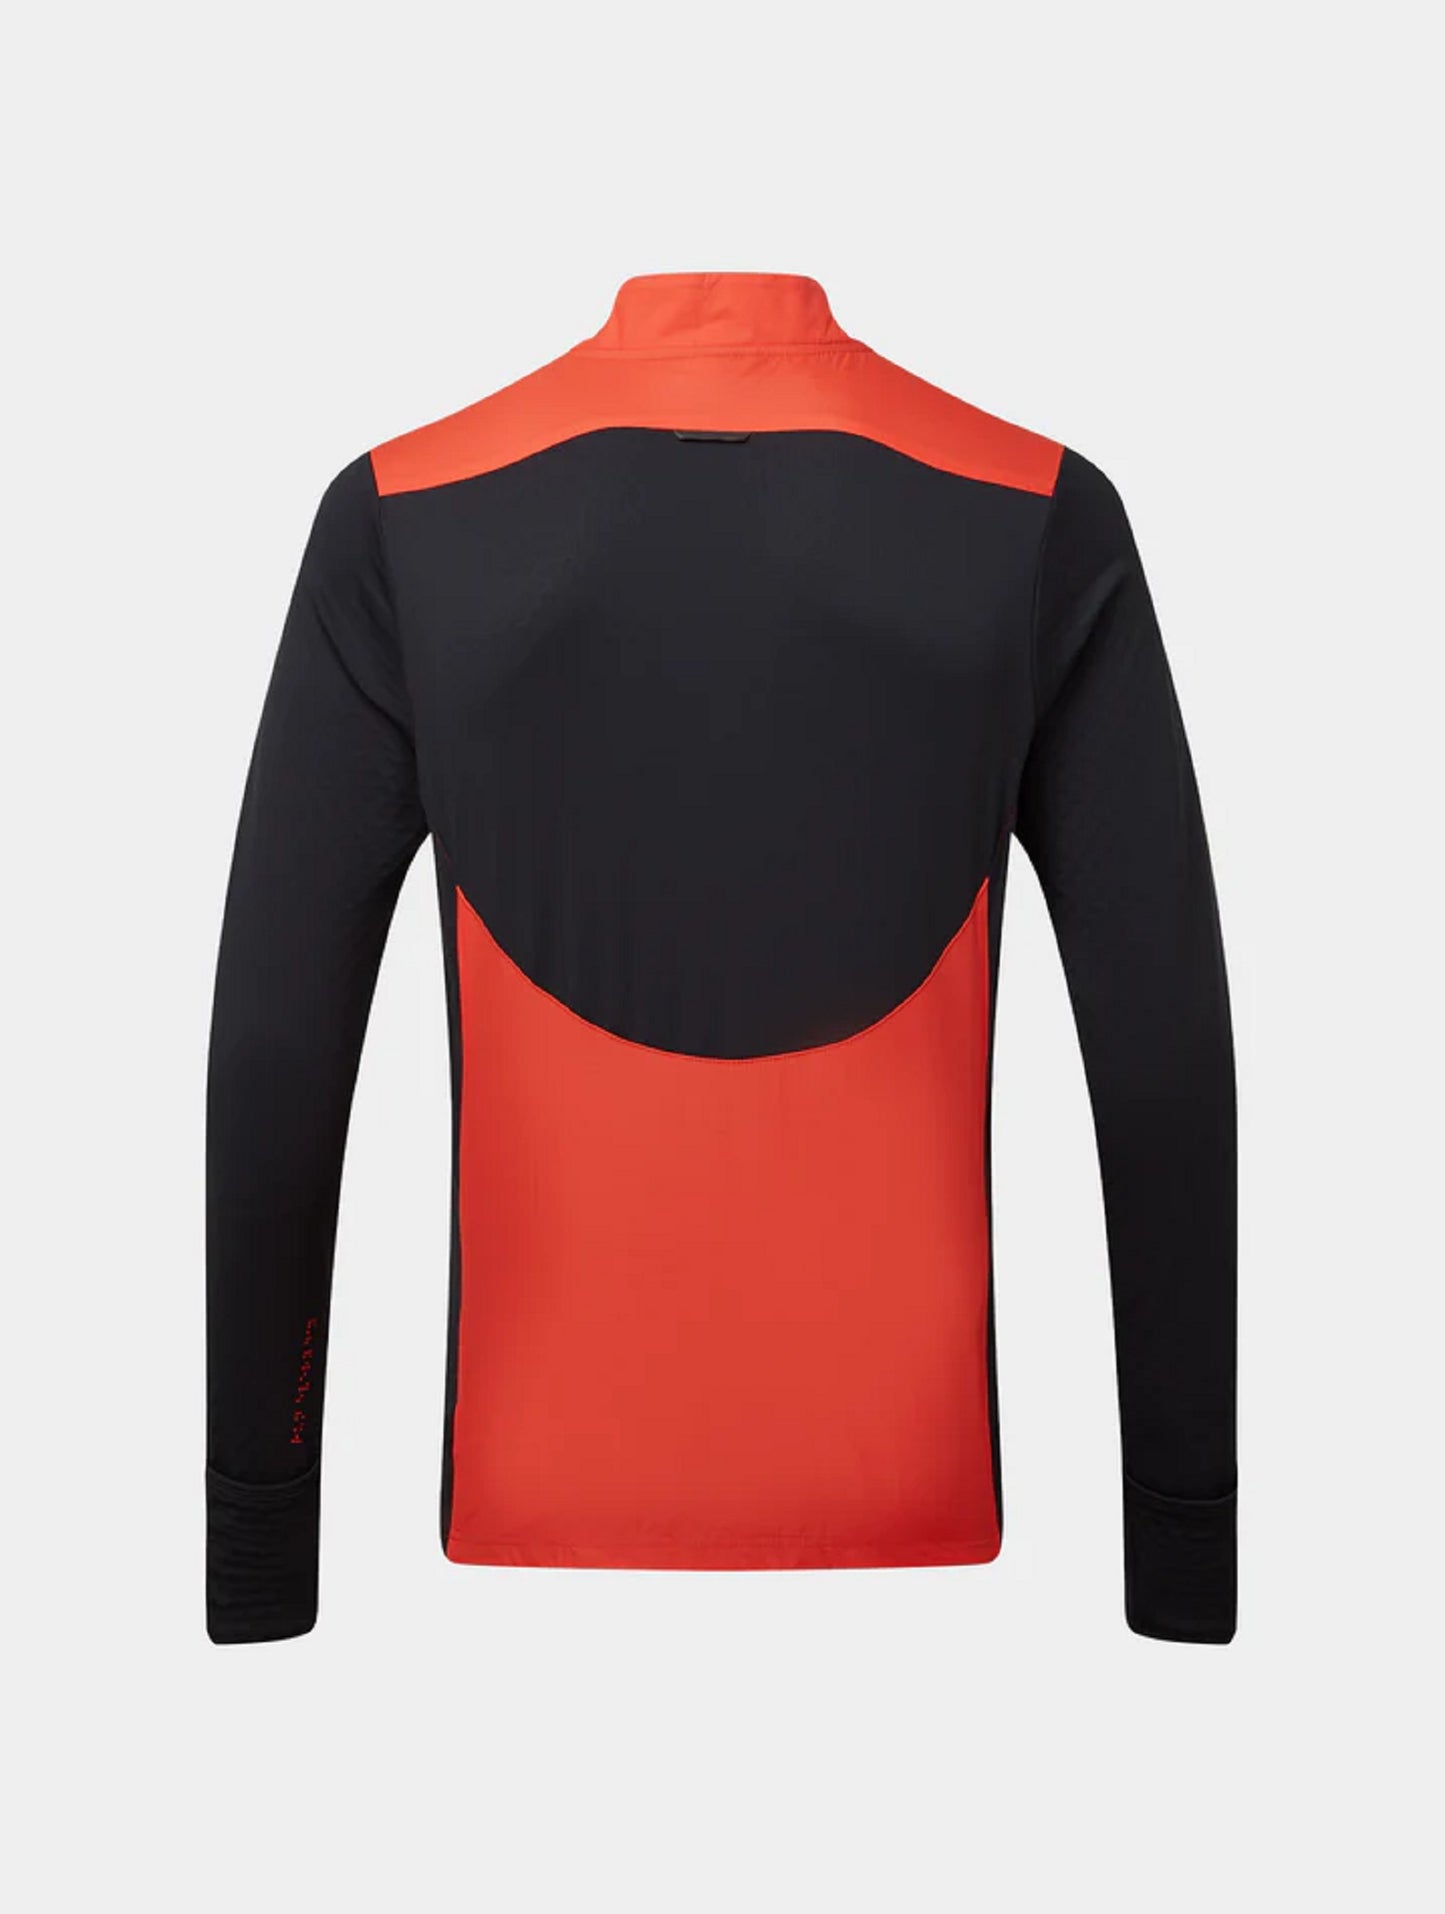 Ronhill's hyperchill jacket, back view in Flame and black